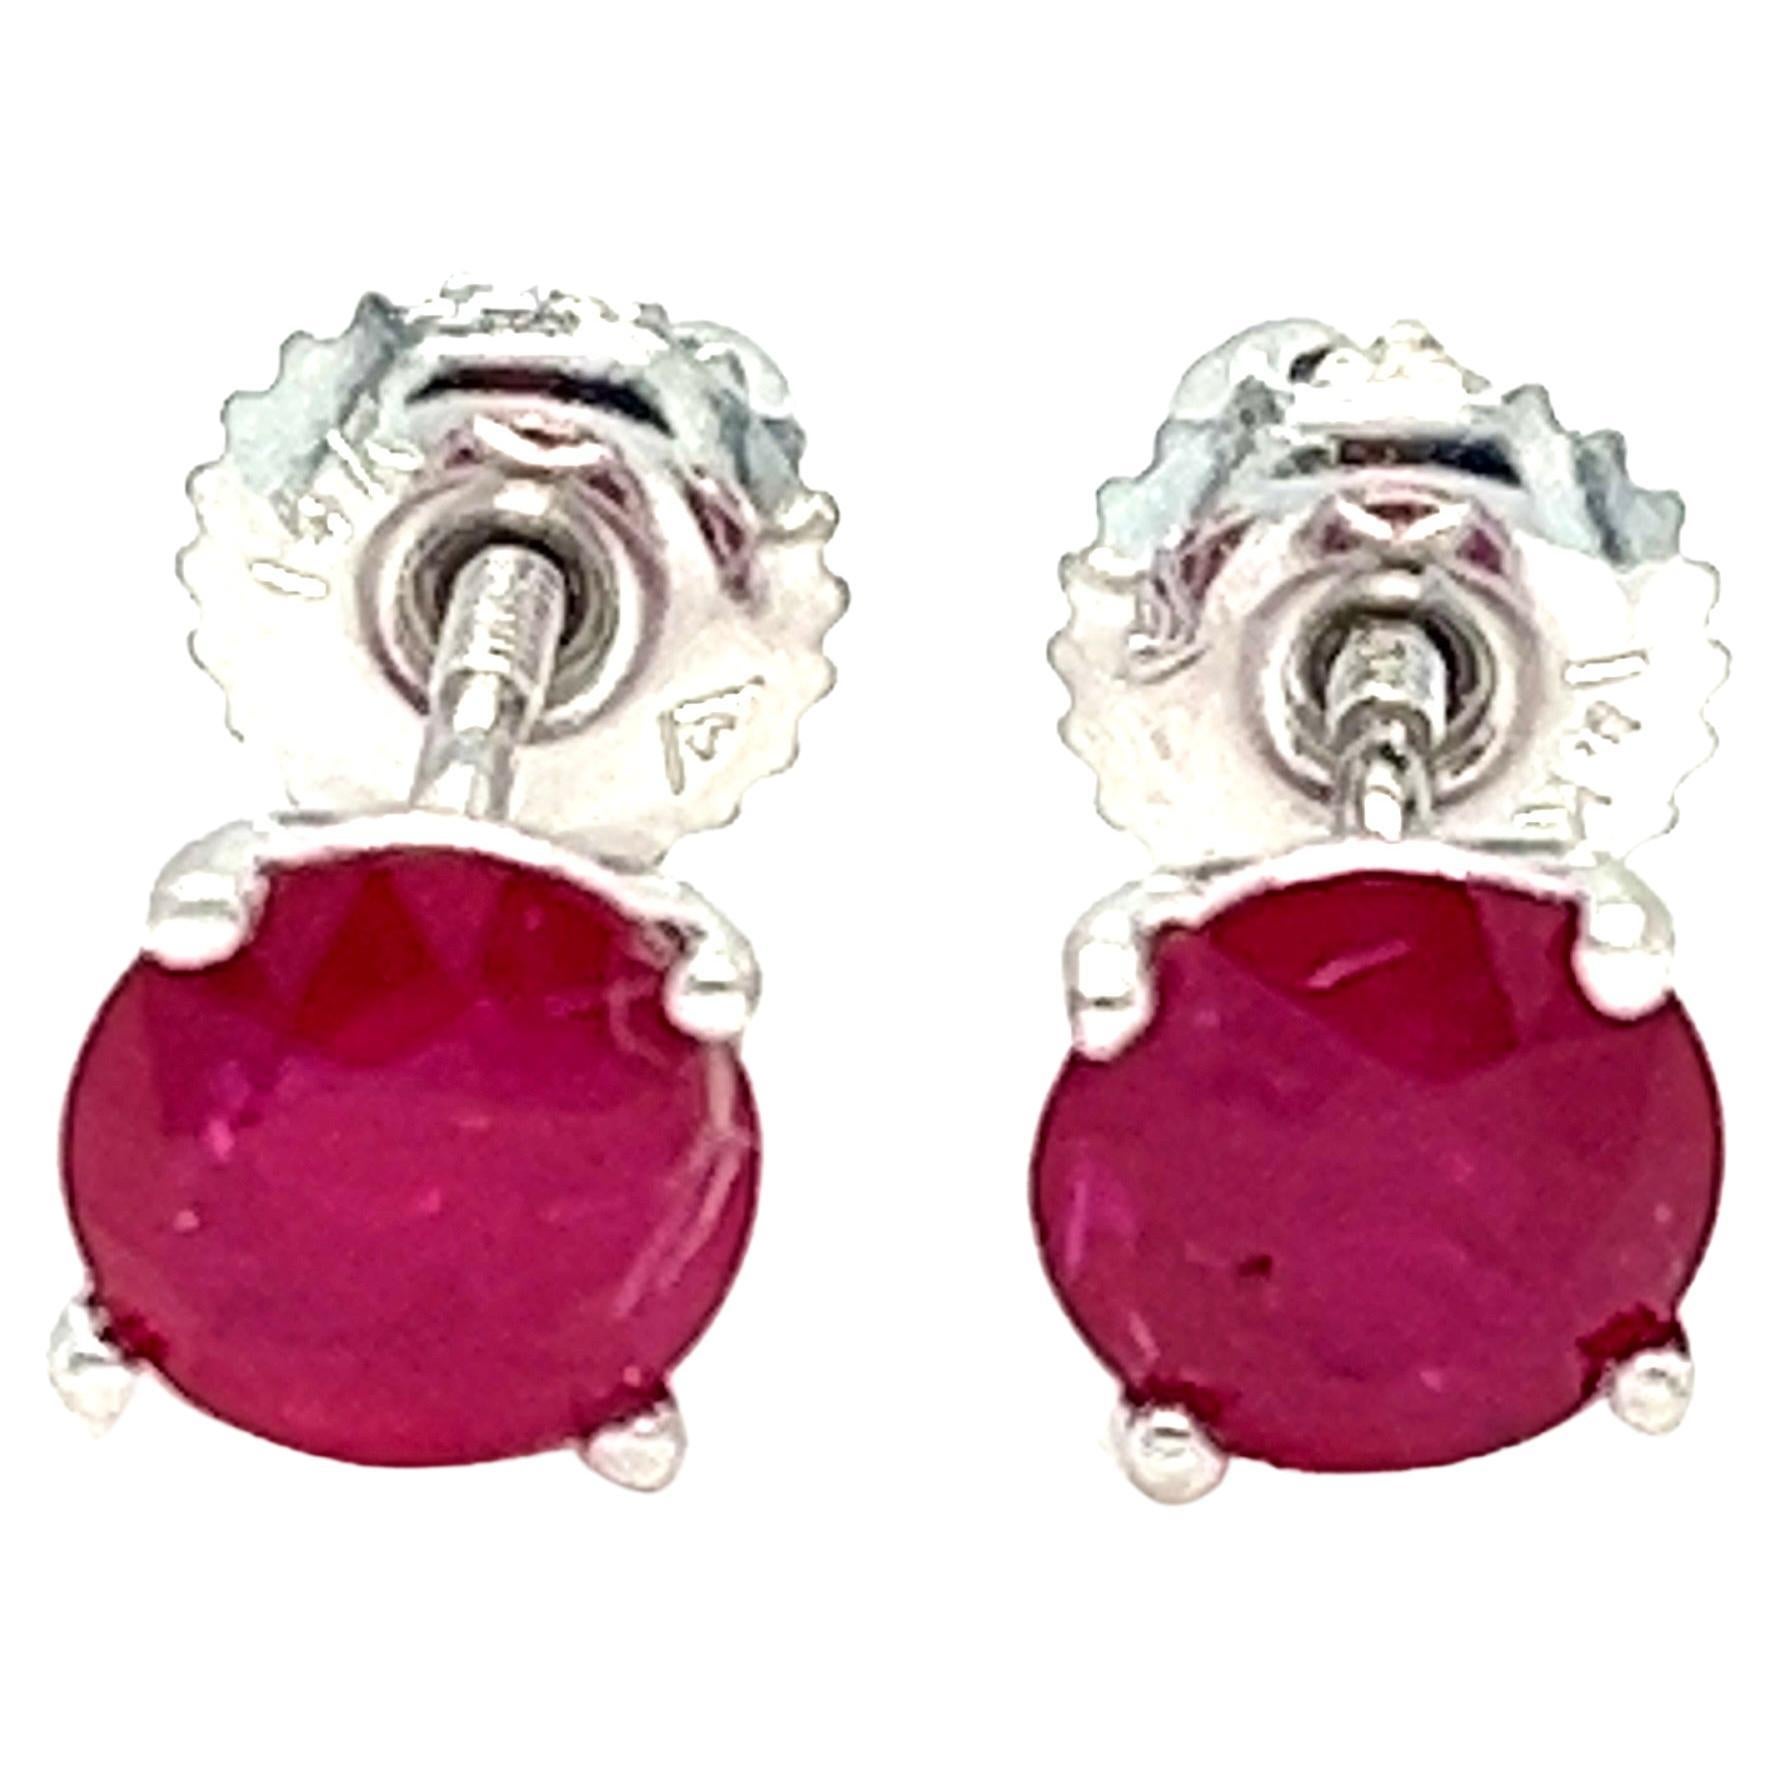  Round Natural Red Ruby Stud Earrings in 14kt White Gold

Elevate your style with these exquisite Round Natural Red Ruby Stud Earrings, set in luxurious 14kt white gold with a secure screw-back closure. These stunning earrings feature genuine